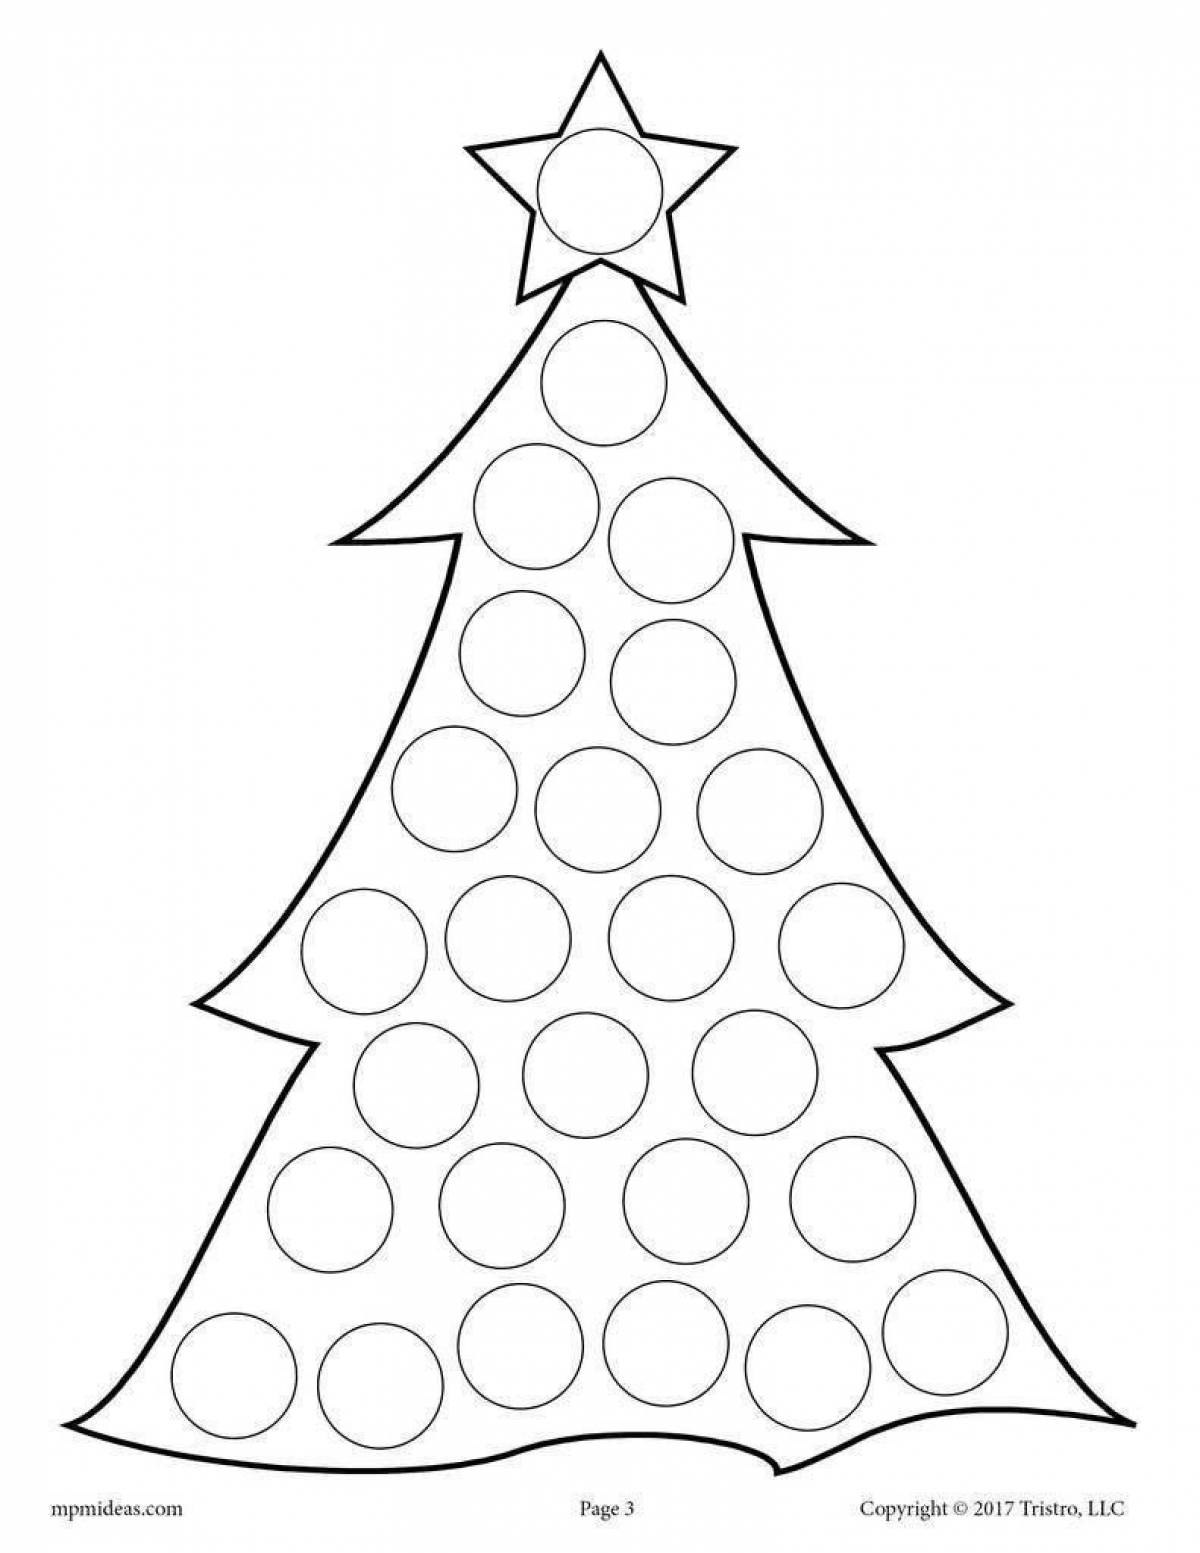 Coloring book nice Christmas tree for children 2-3 years old